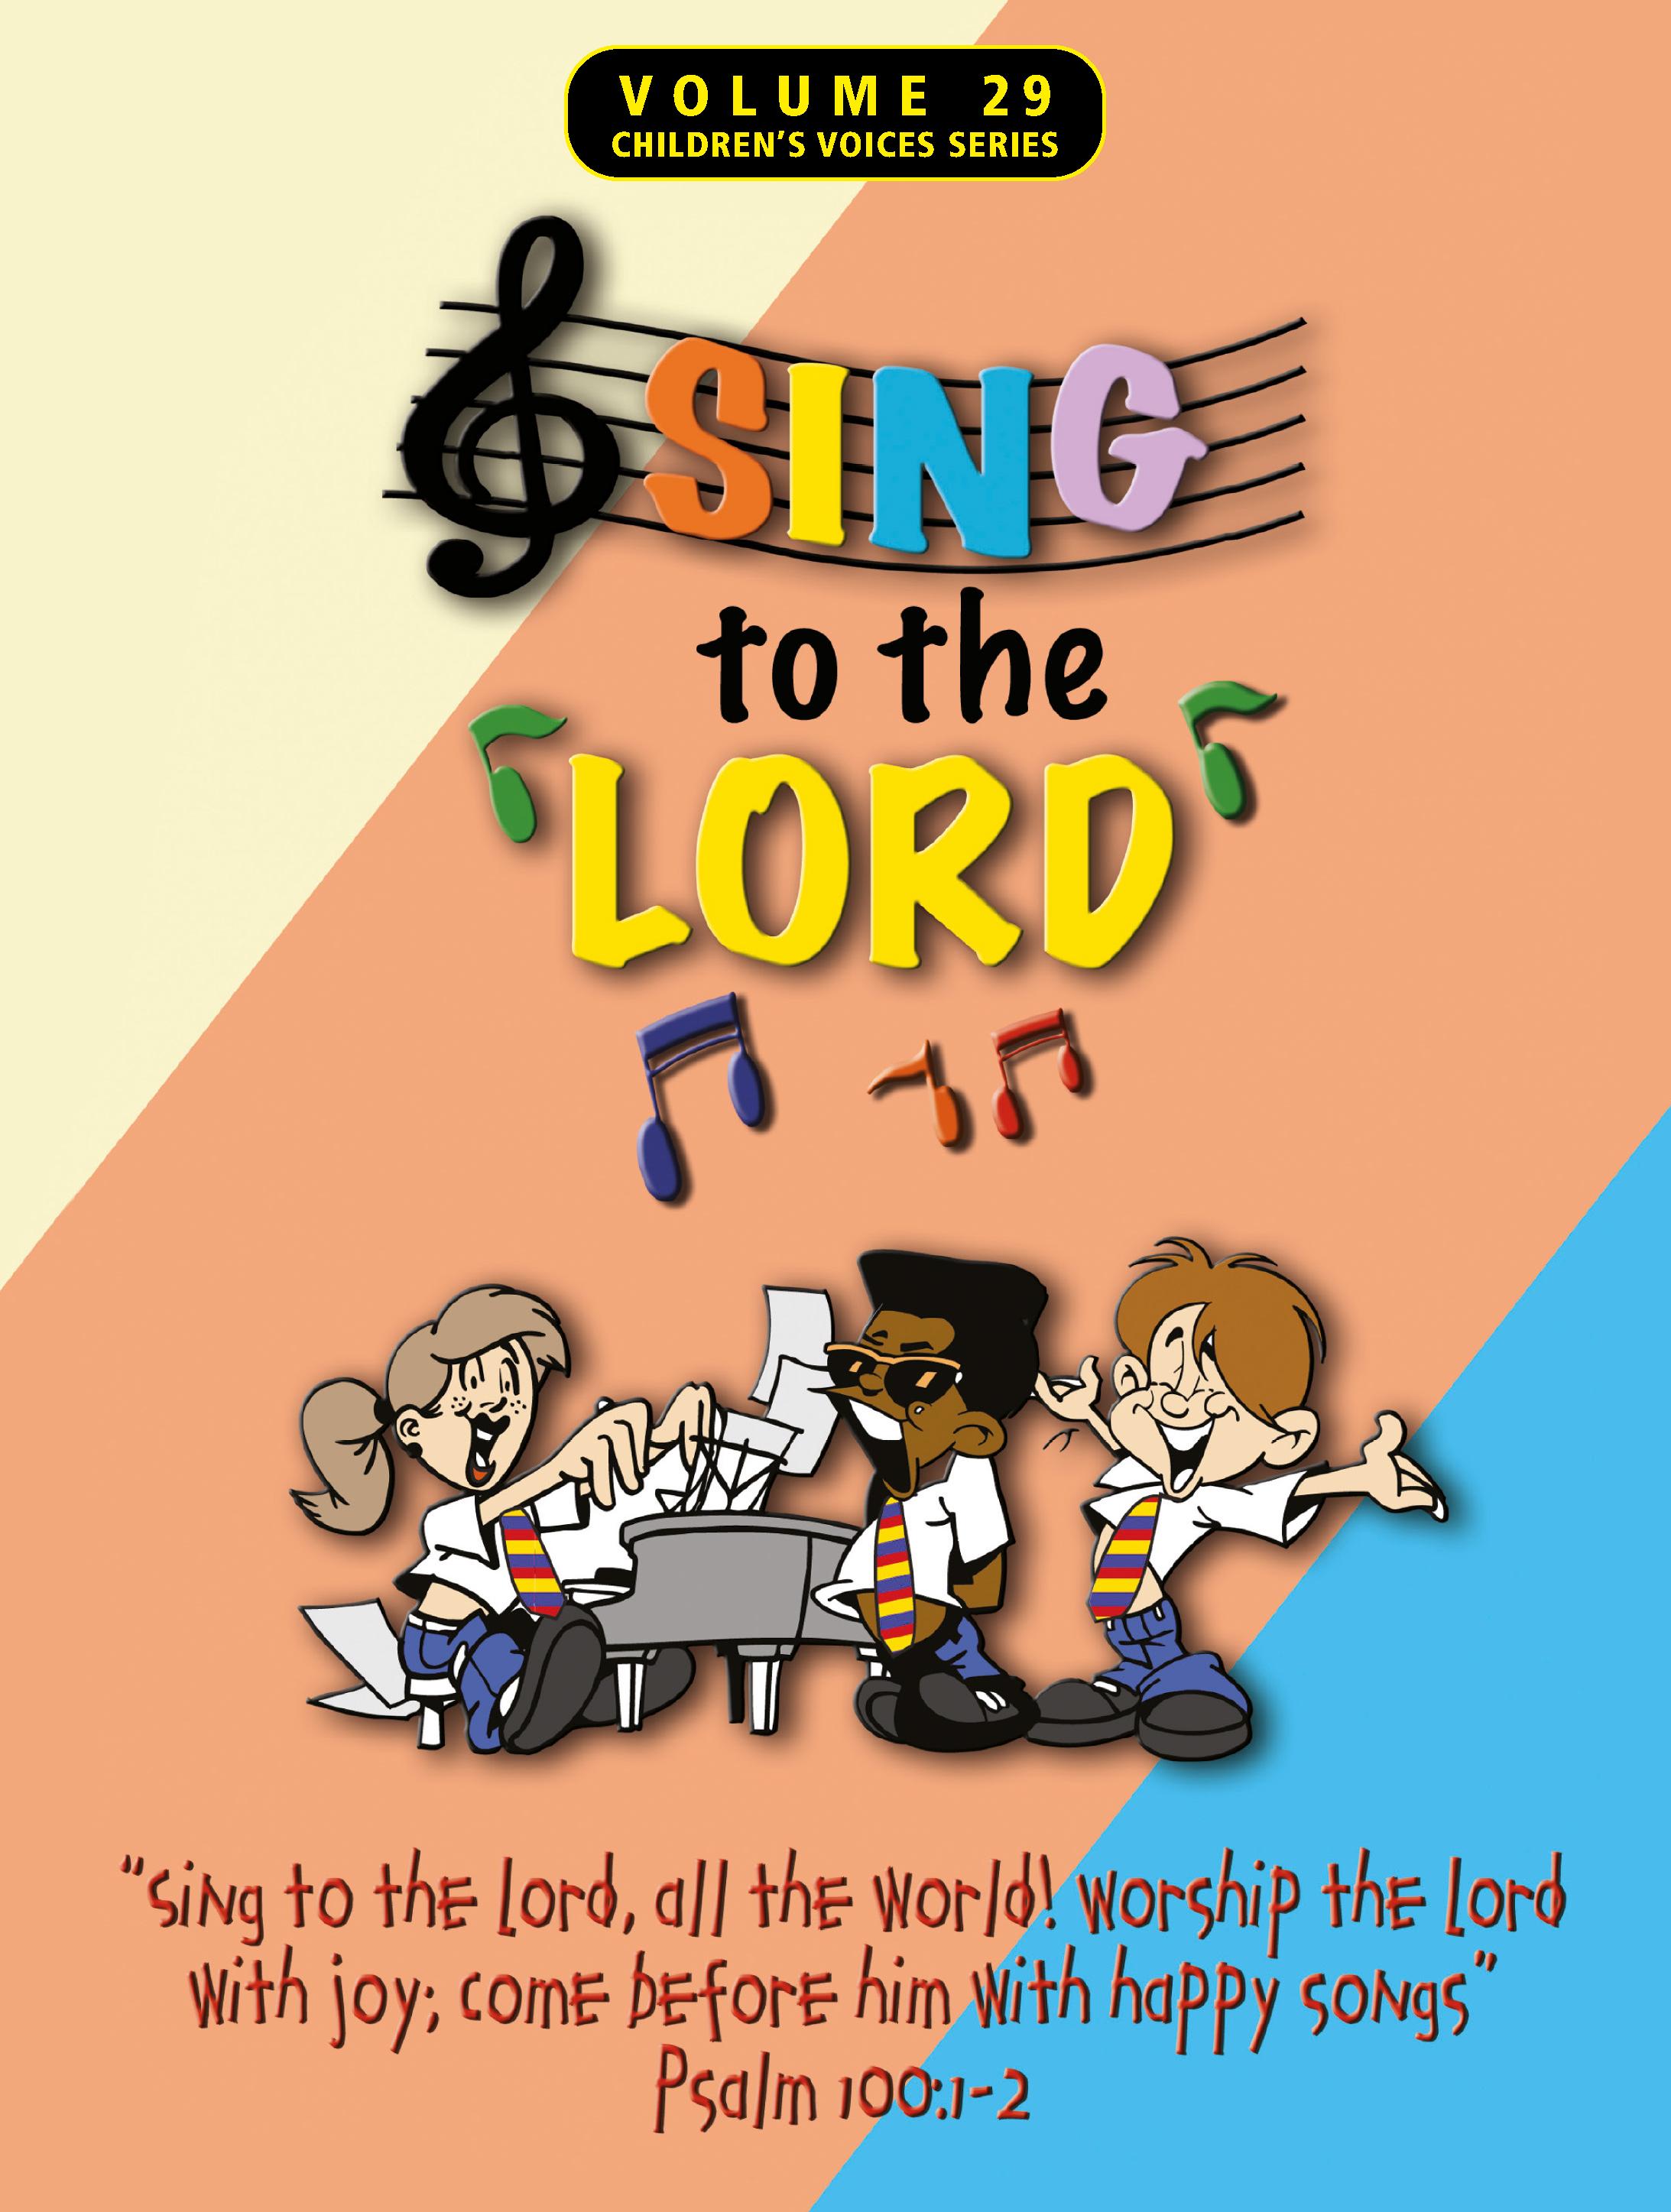 Sing to the Lord, Children's Voices Series, Volume 29